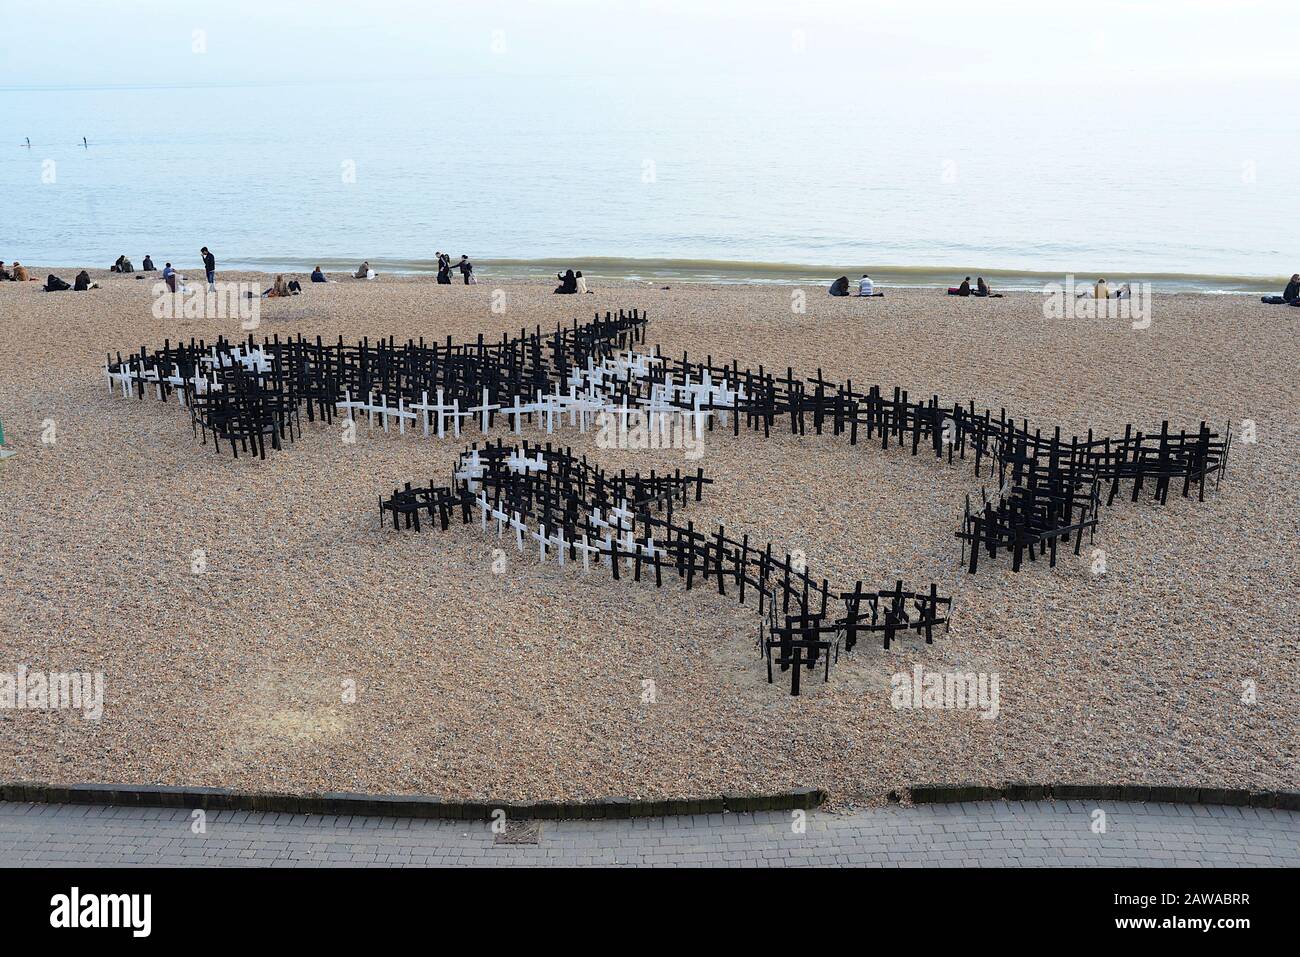 Brighton, U.K., 10 Mar, 2015. Hundreds of black and white painted wooden stakes shaped like crosses are arranged in the shingle on Brighton beach in the form of a killer whale and it’s calf in this art installation titled “Whale Graveyard - setting captive spirits free”. The giant piece of art, created to coincide with the city’s 2015 WhaleFest festival, featured 1,500 crosses. Each cross represents a whale or dolphin that has died in captivity. Stock Photo